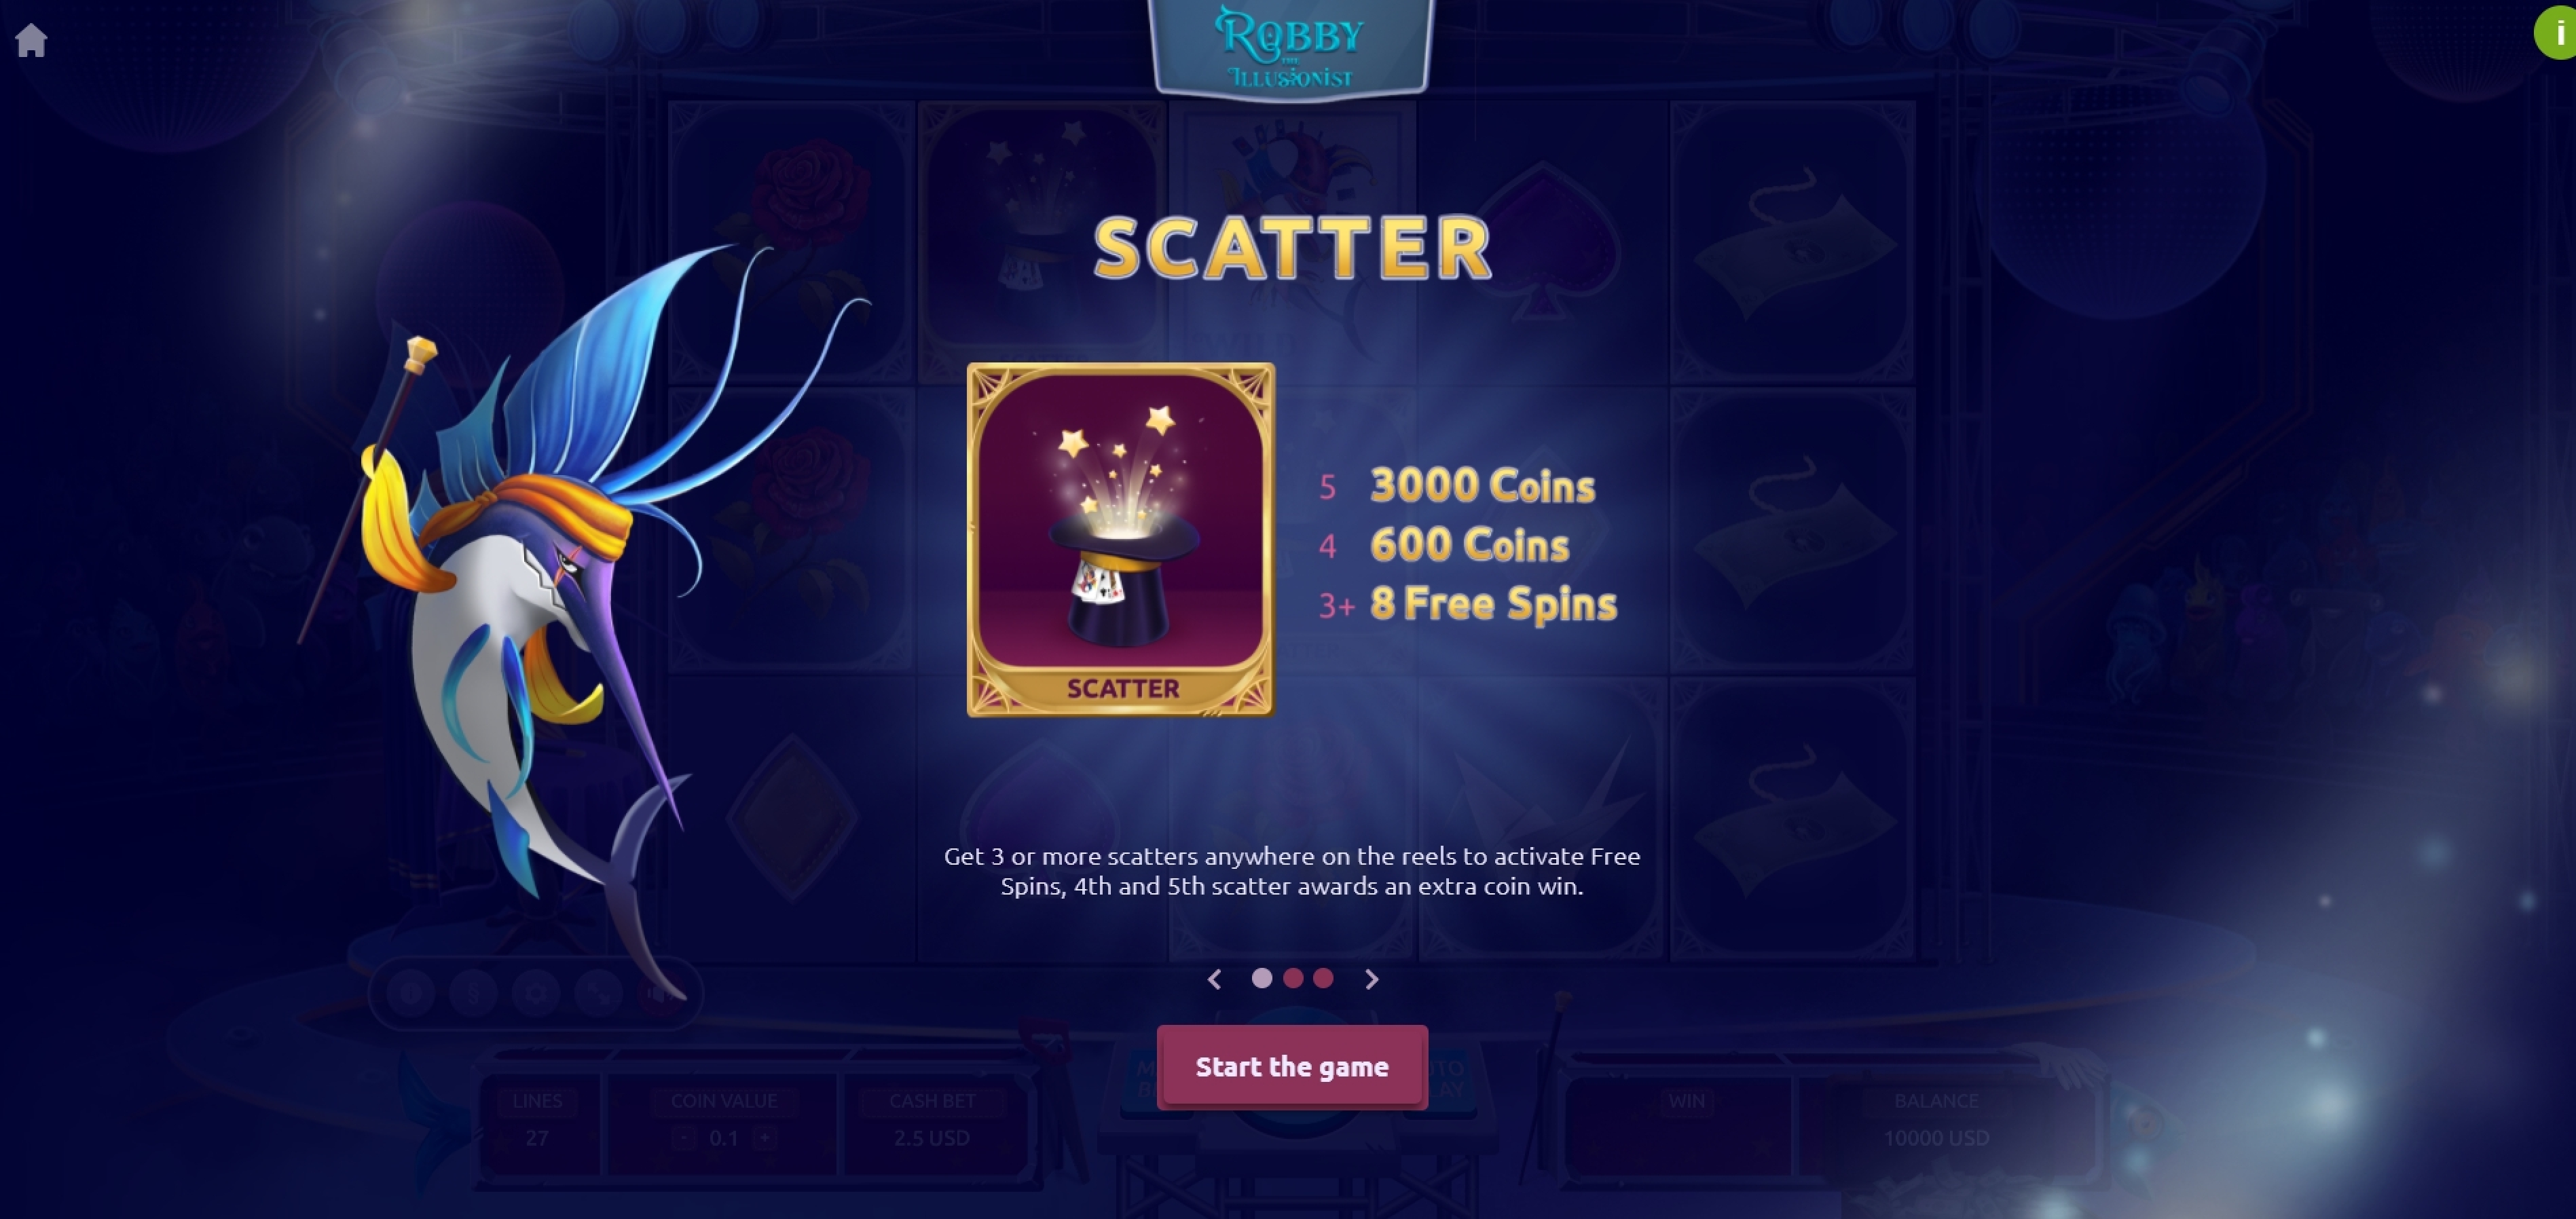 Play Robby the Illusionist Free Casino Slot Game by TrueLab Games